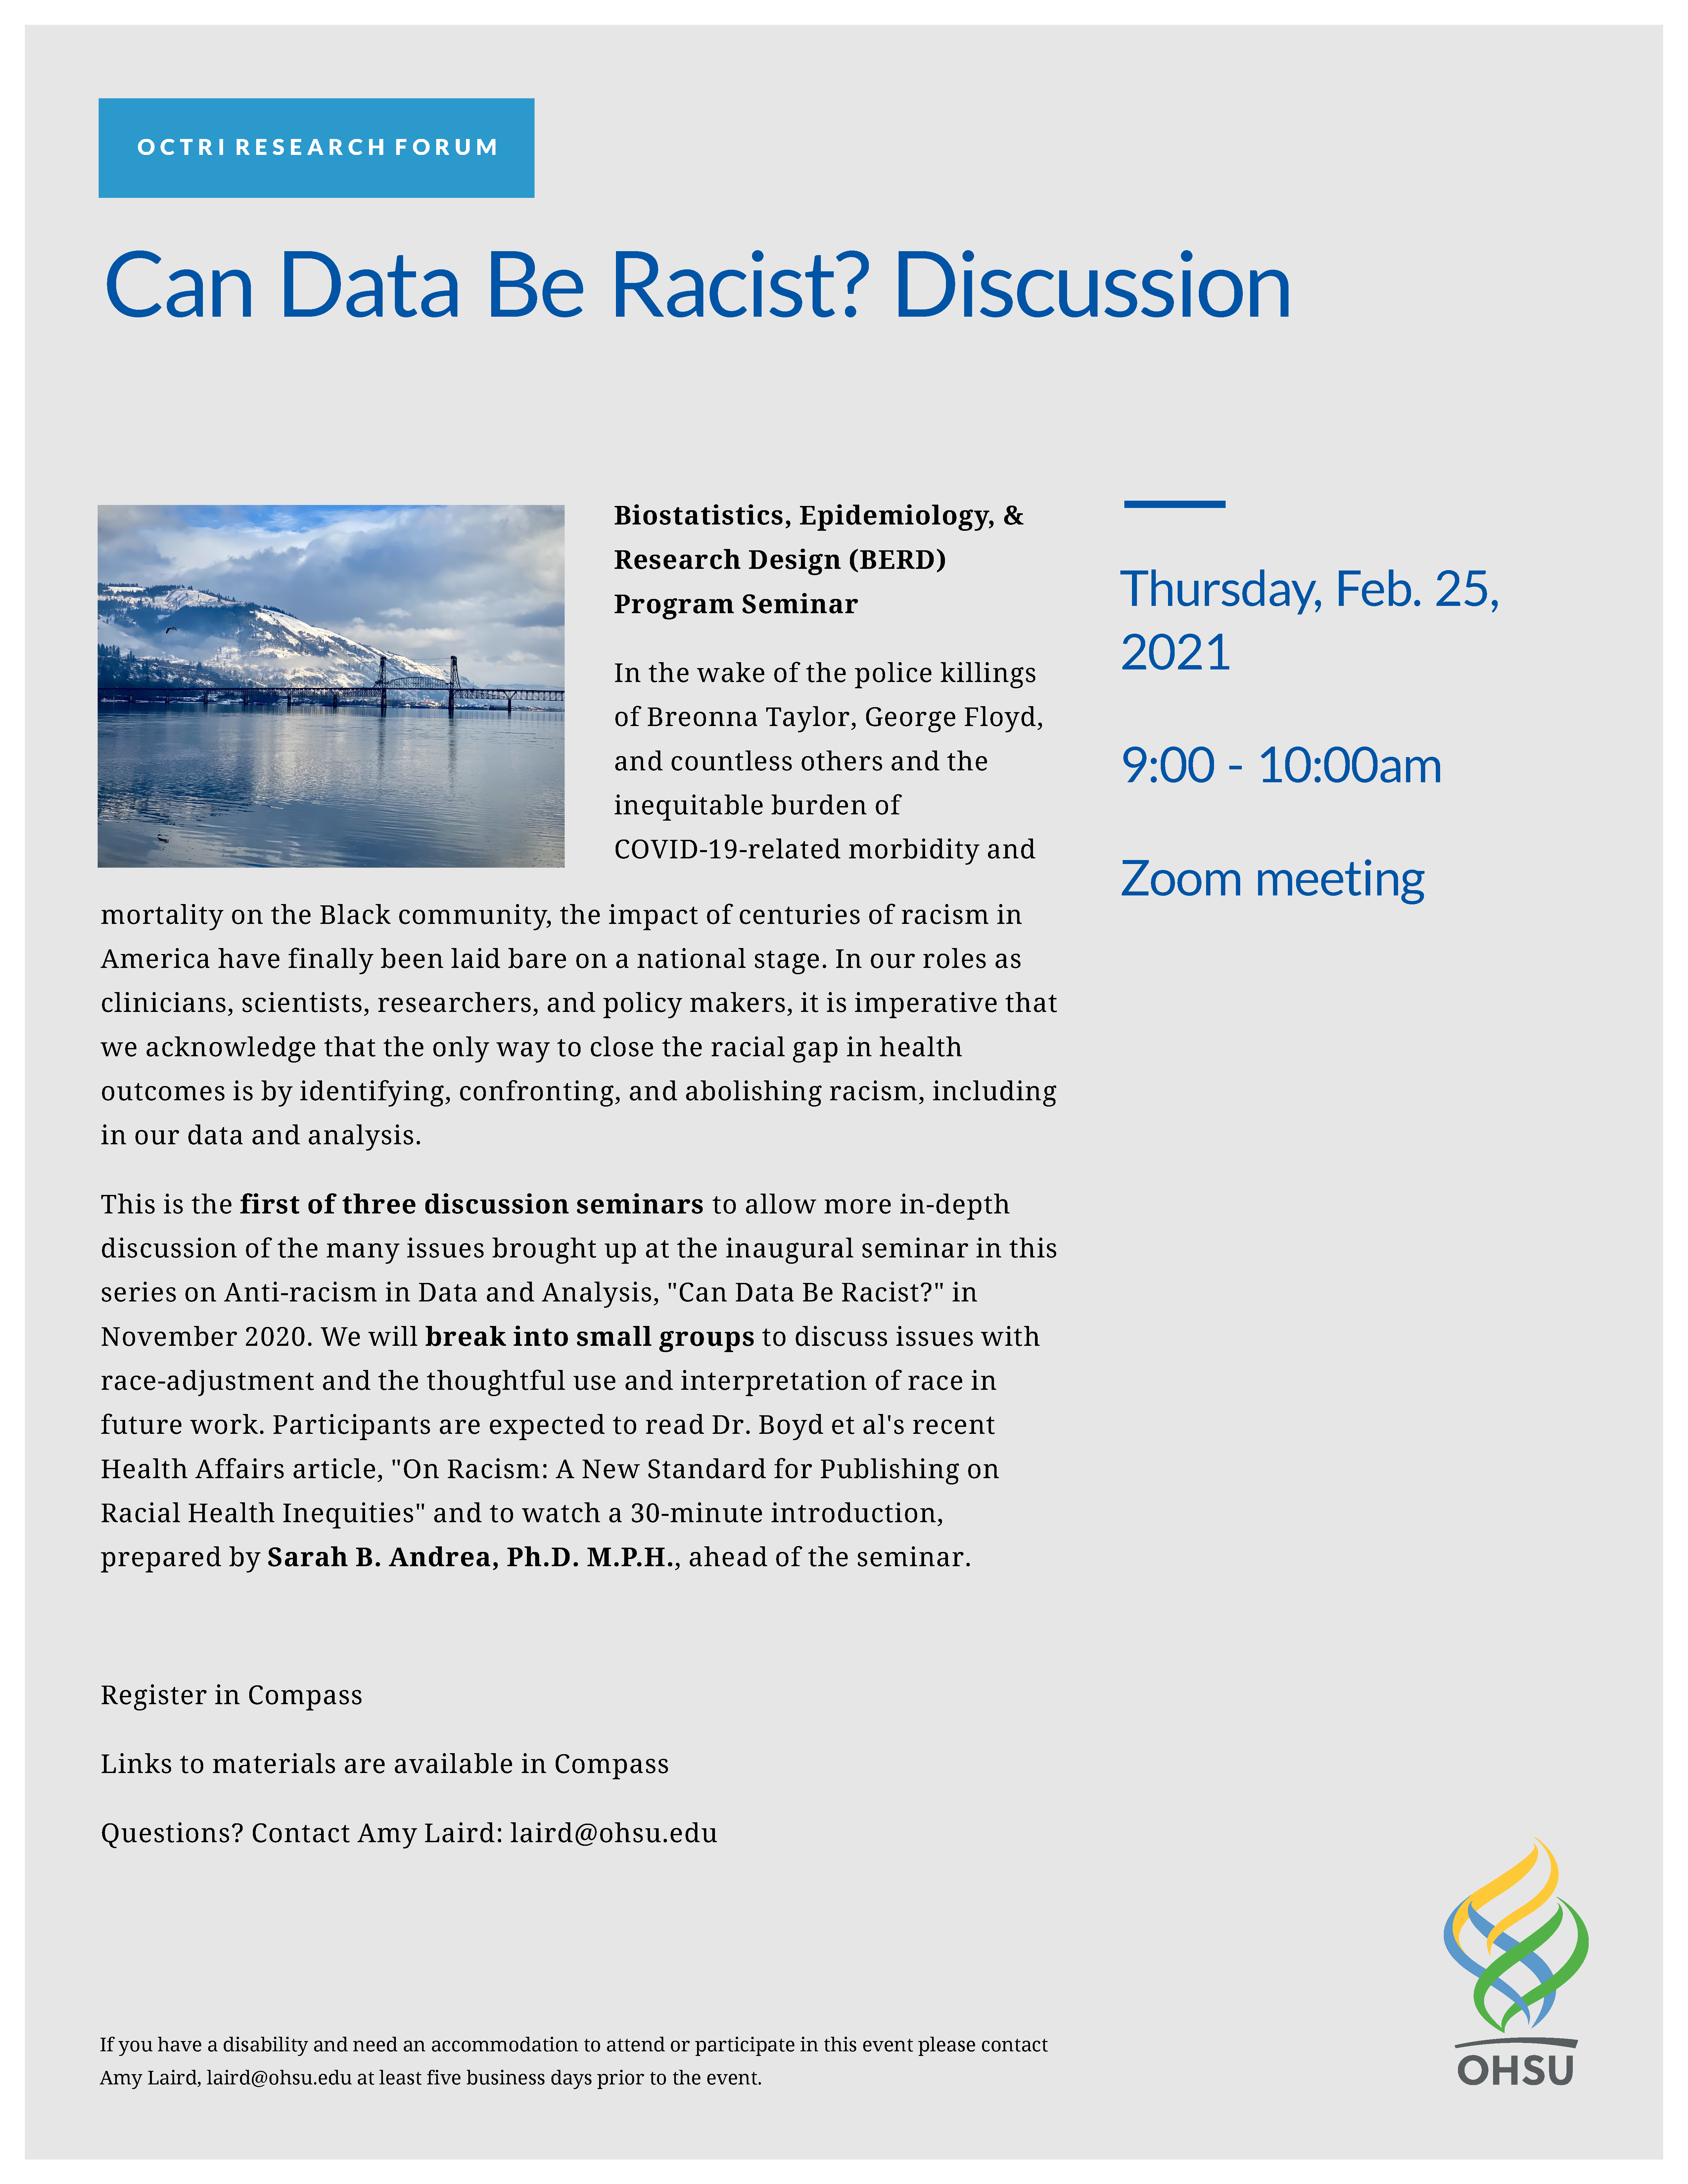 This is a flyer for the OCTRI BERD research forum that is discussion based following the November 2020 research forum titled "Can Data Be Racist?"